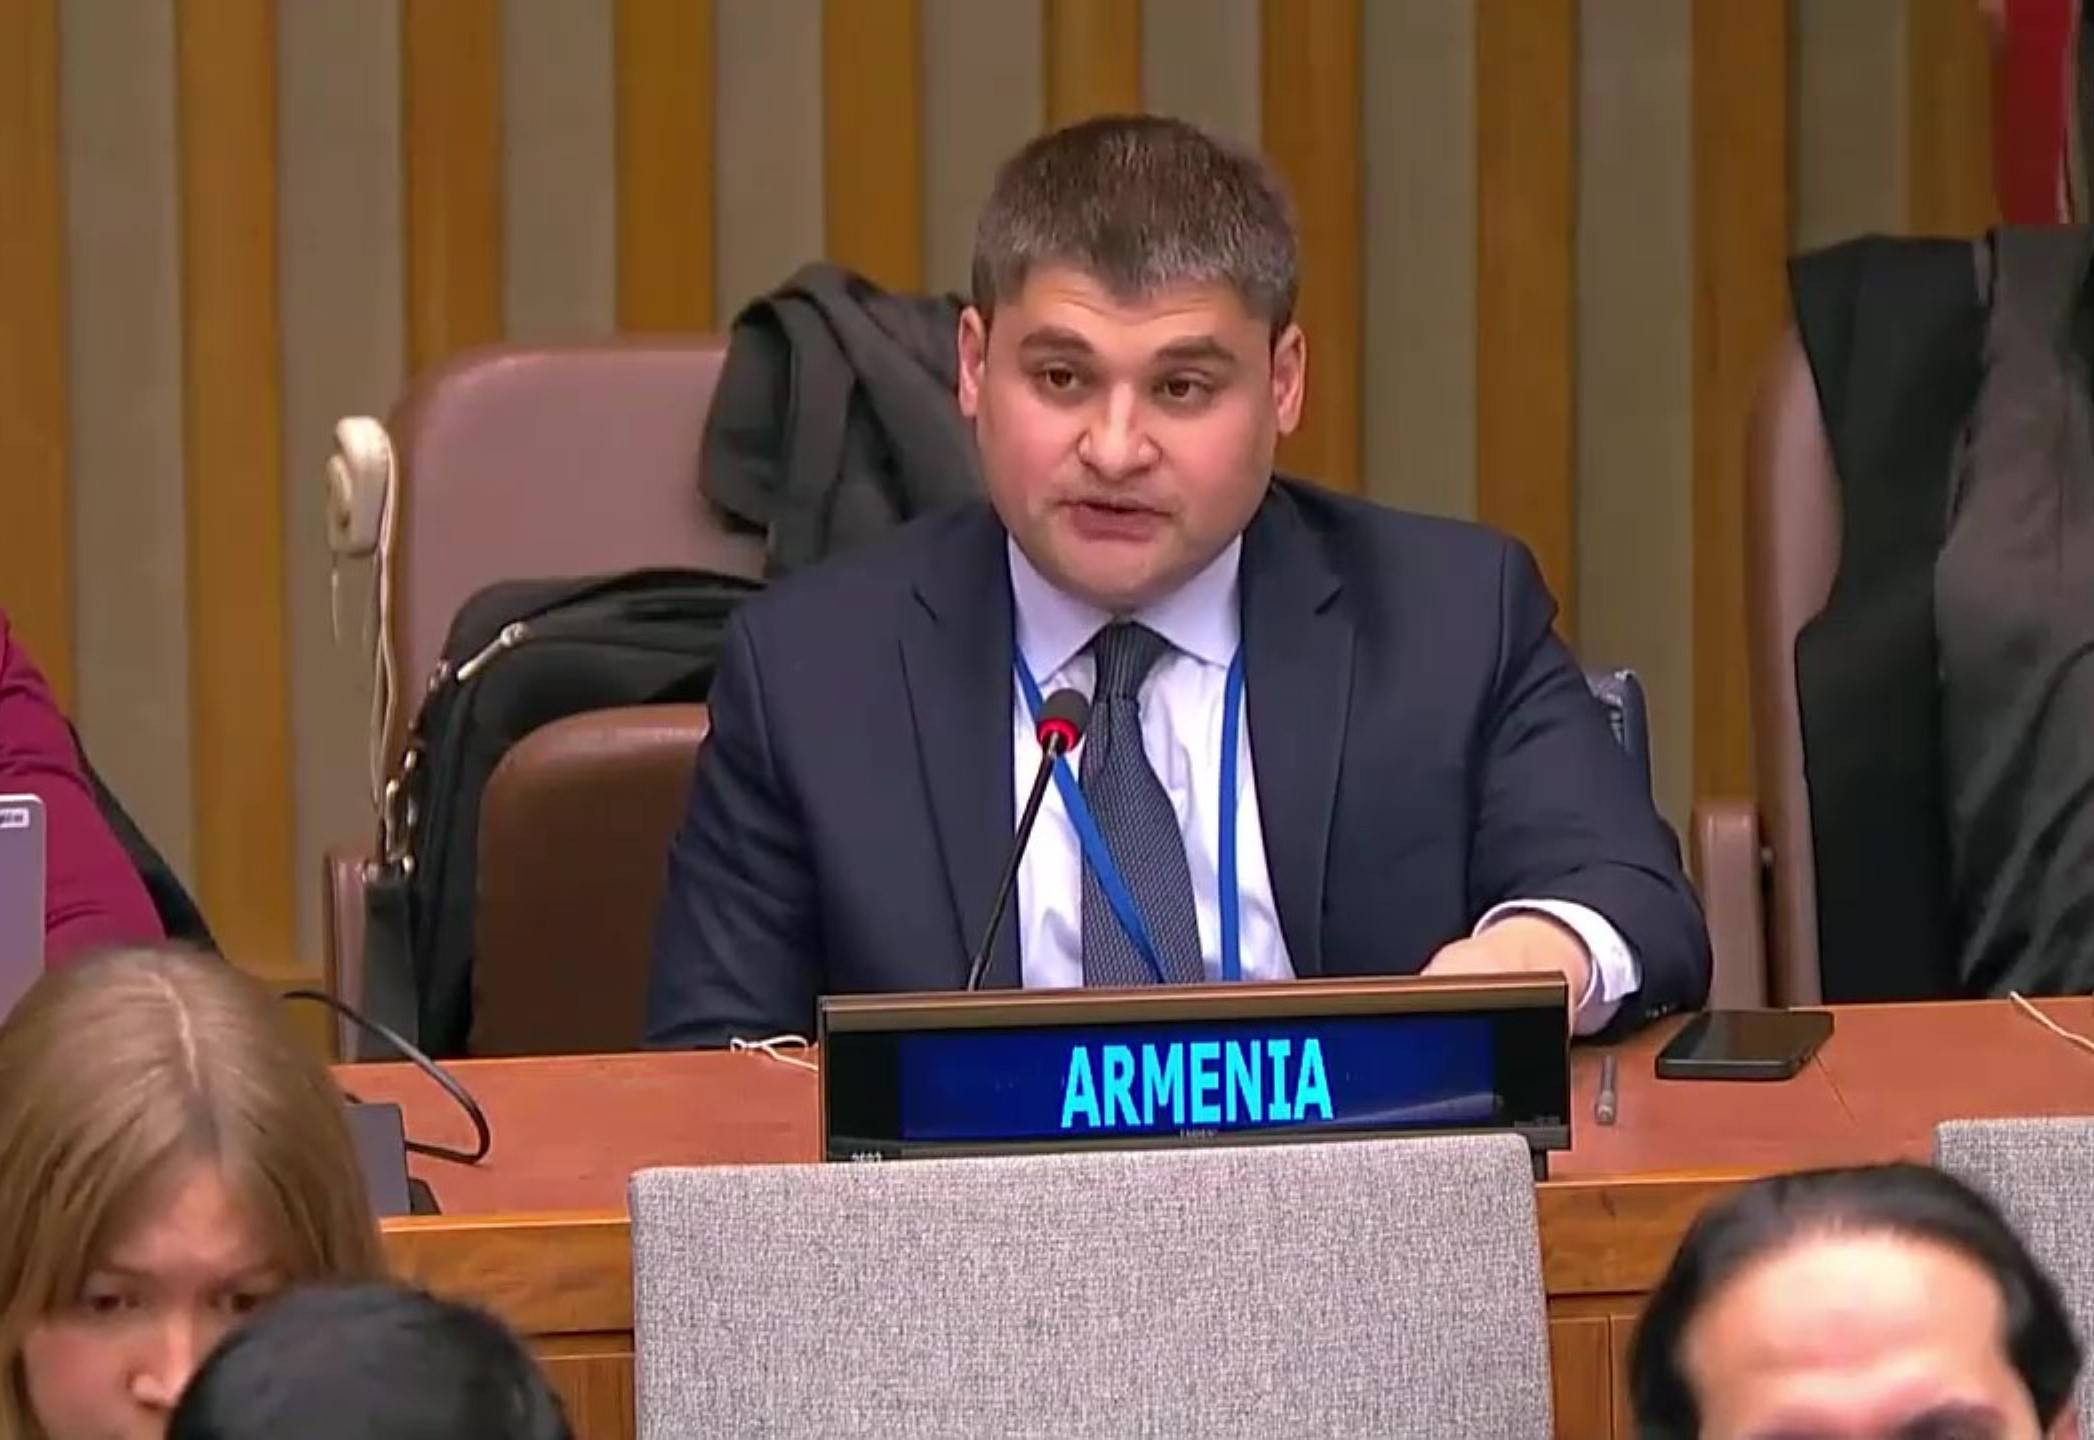 Statement by Mr. Andranik Grigoryan, Second Secretary of the Permanent Mission of Armenia, at the UNGA77 First Committee Thematic Discussion on Nuclear Weapons